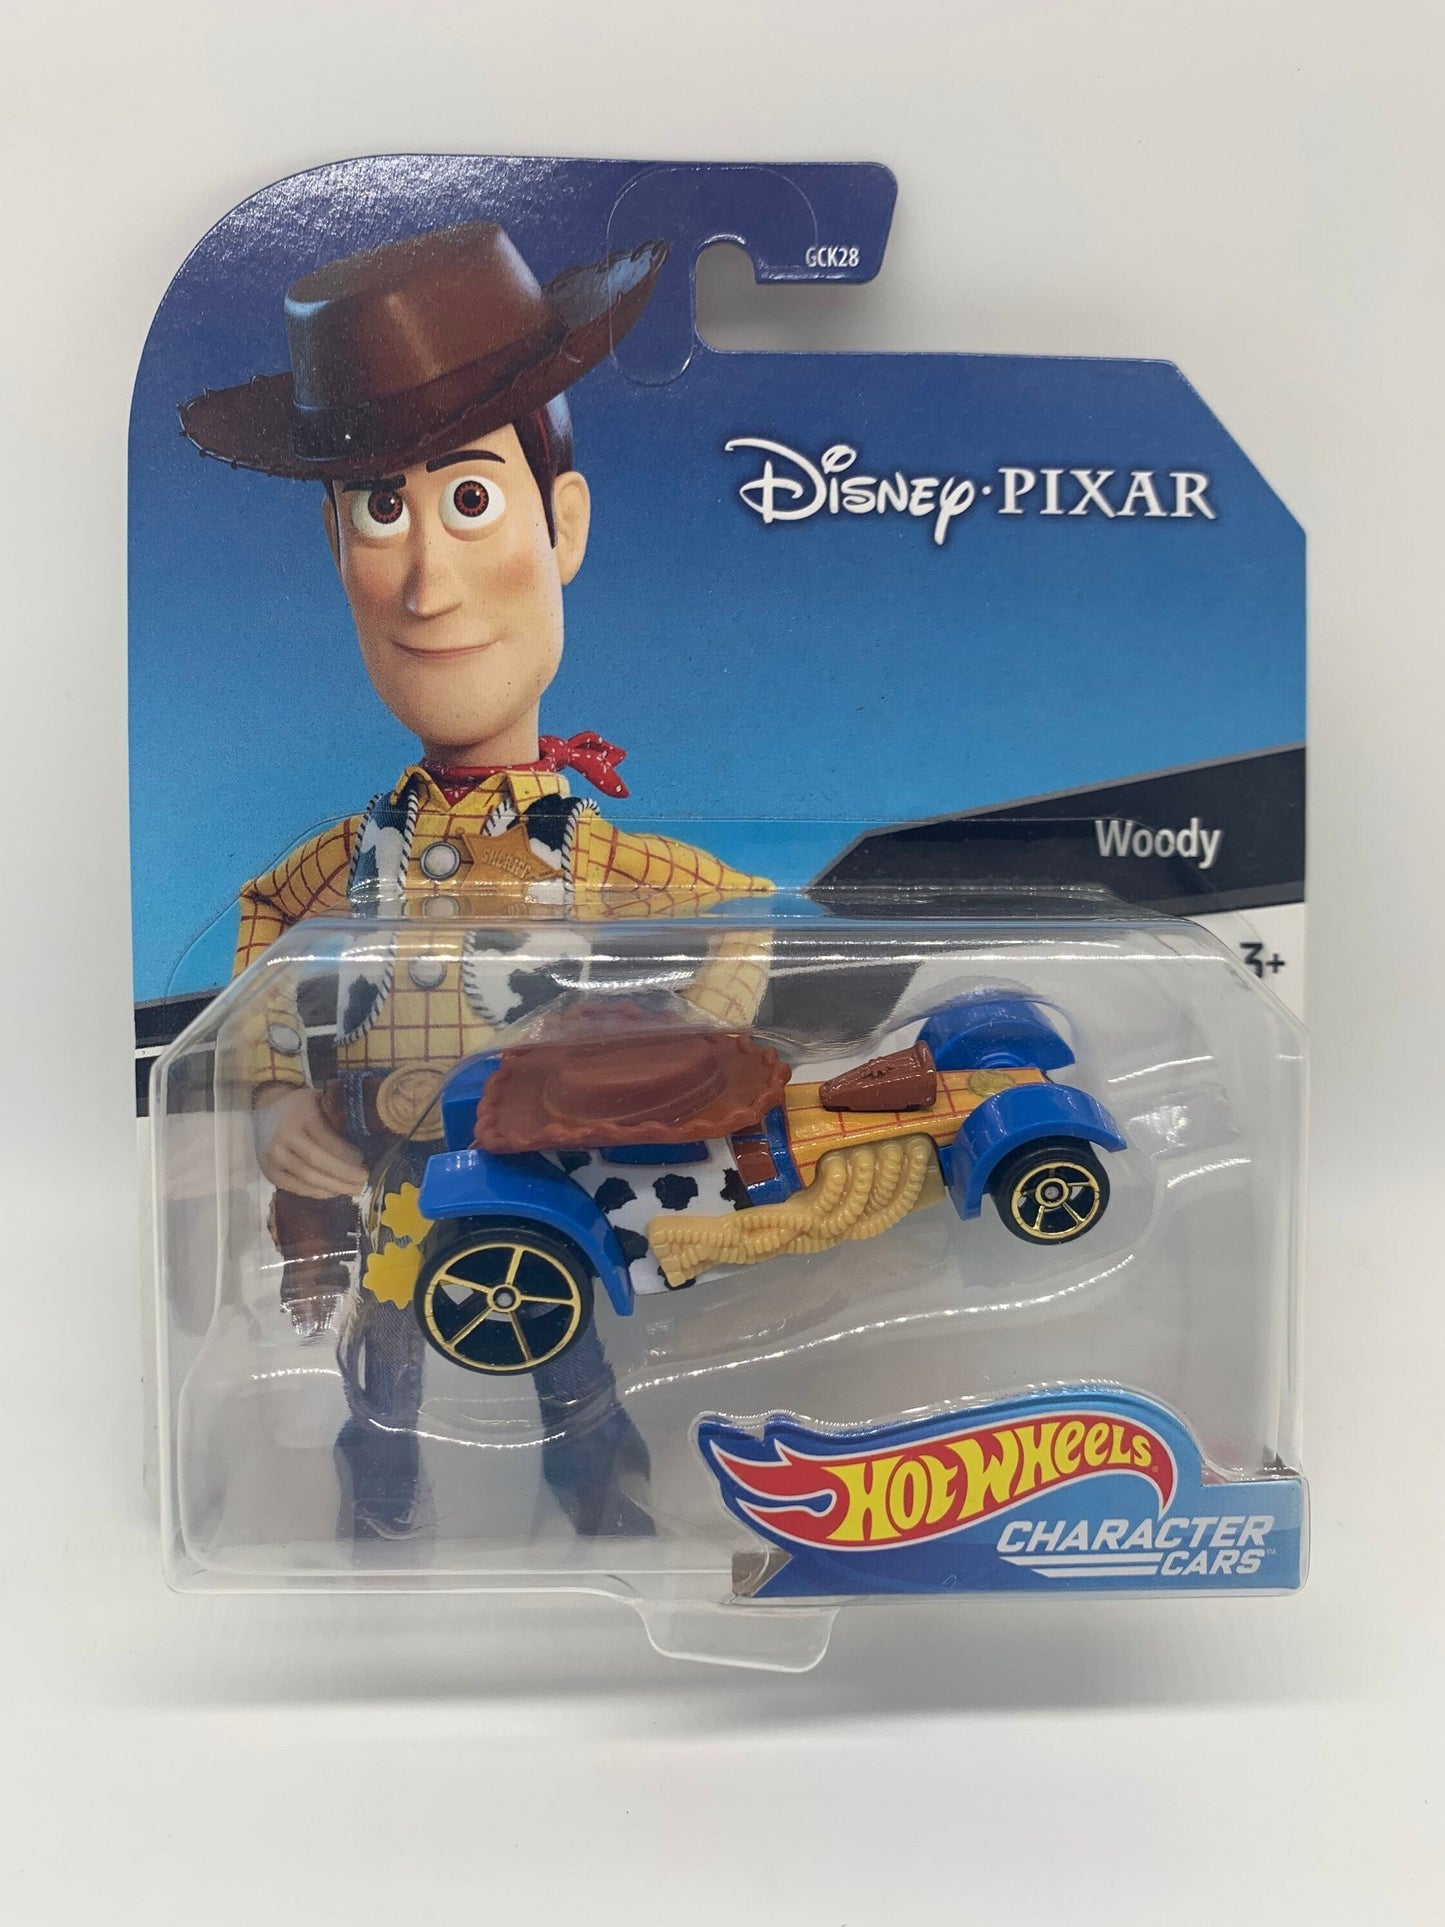 Hot Wheels Sheriff Woody Toy Story Blue Disney Character Cars Perfect Birthday Gift Miniature Collectable Model Toy Car